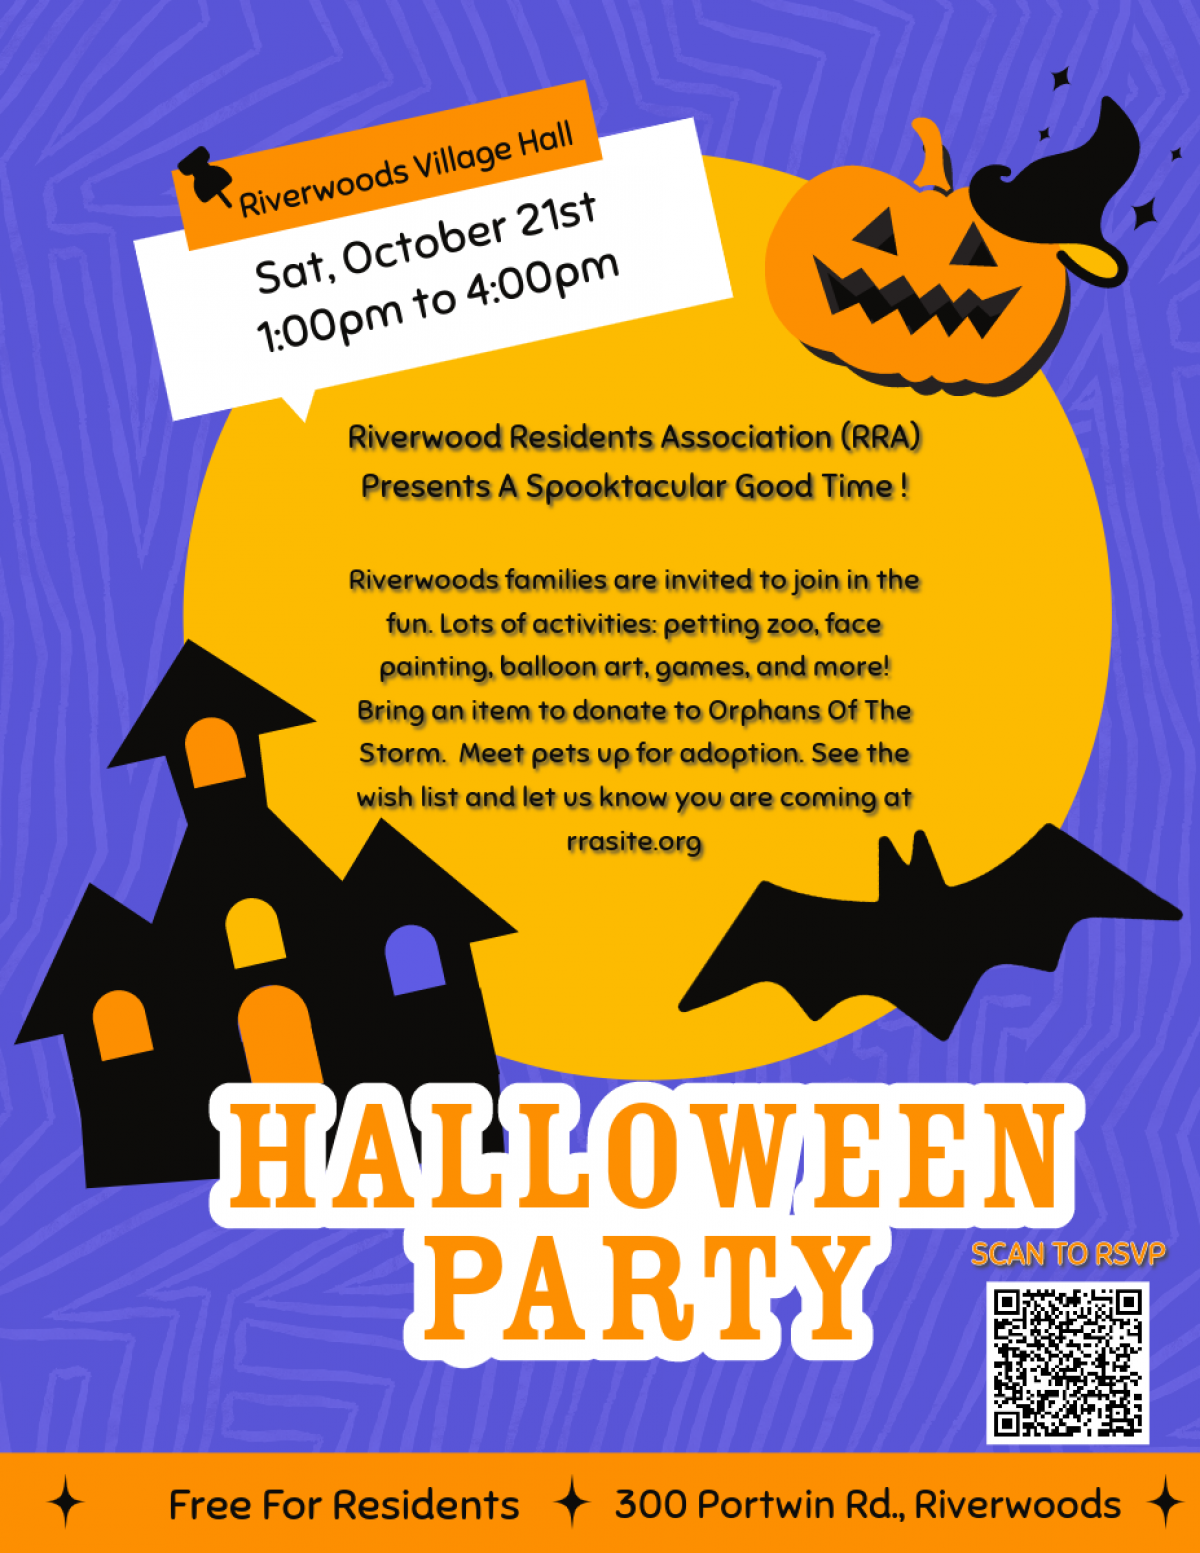 Halloween Party Invitation on October 21st, 1:00pm to 4:00pm at Riverwoods Village Hall